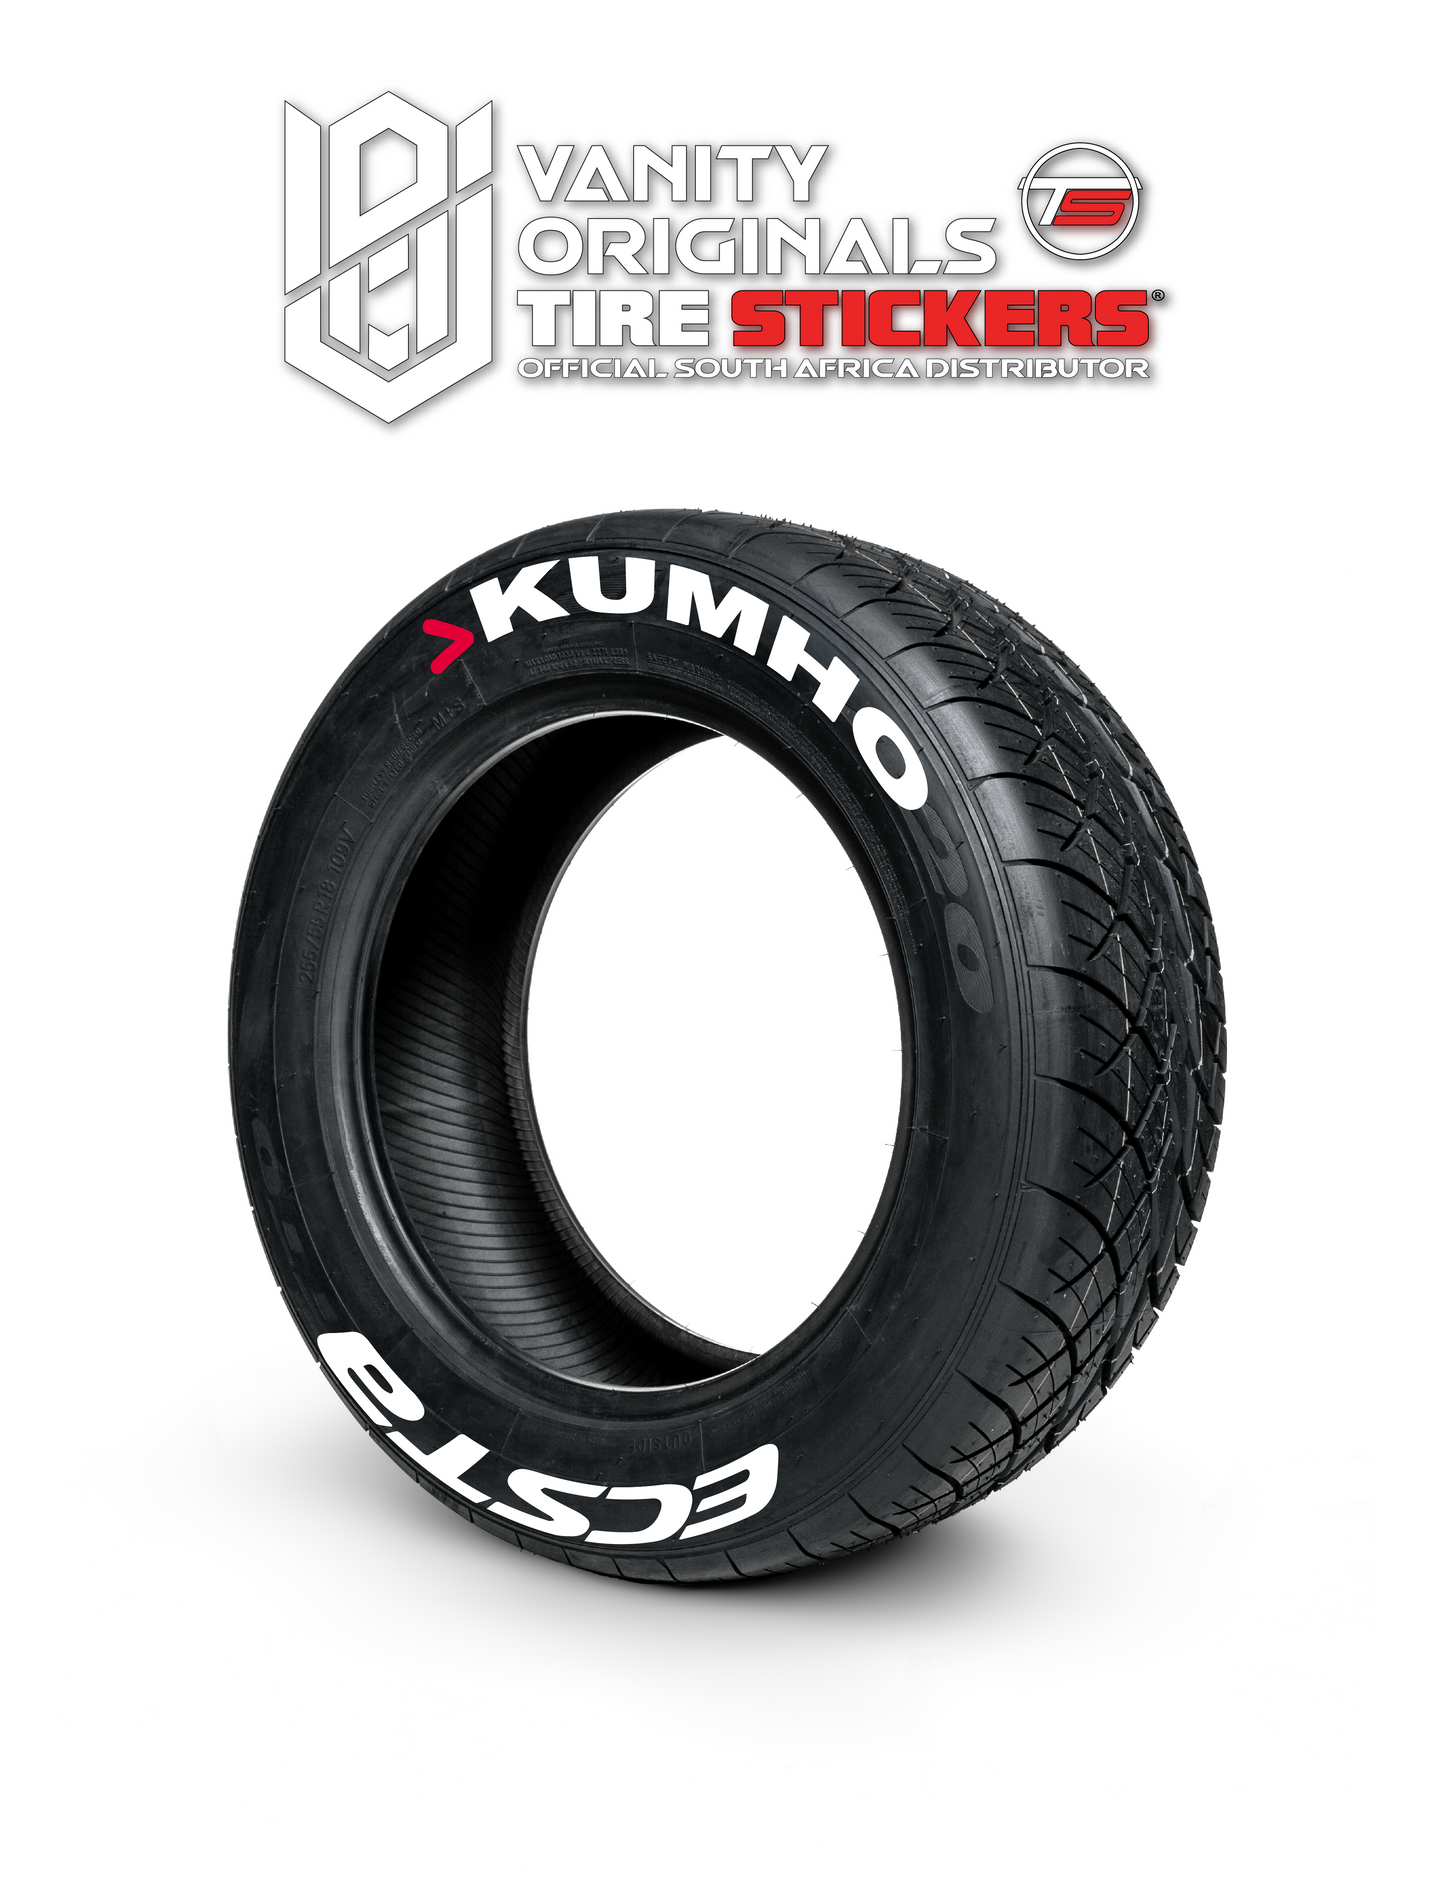 Kumho Ecsta ( 8x Rubber Decals, Adhesive & Instructions Included )